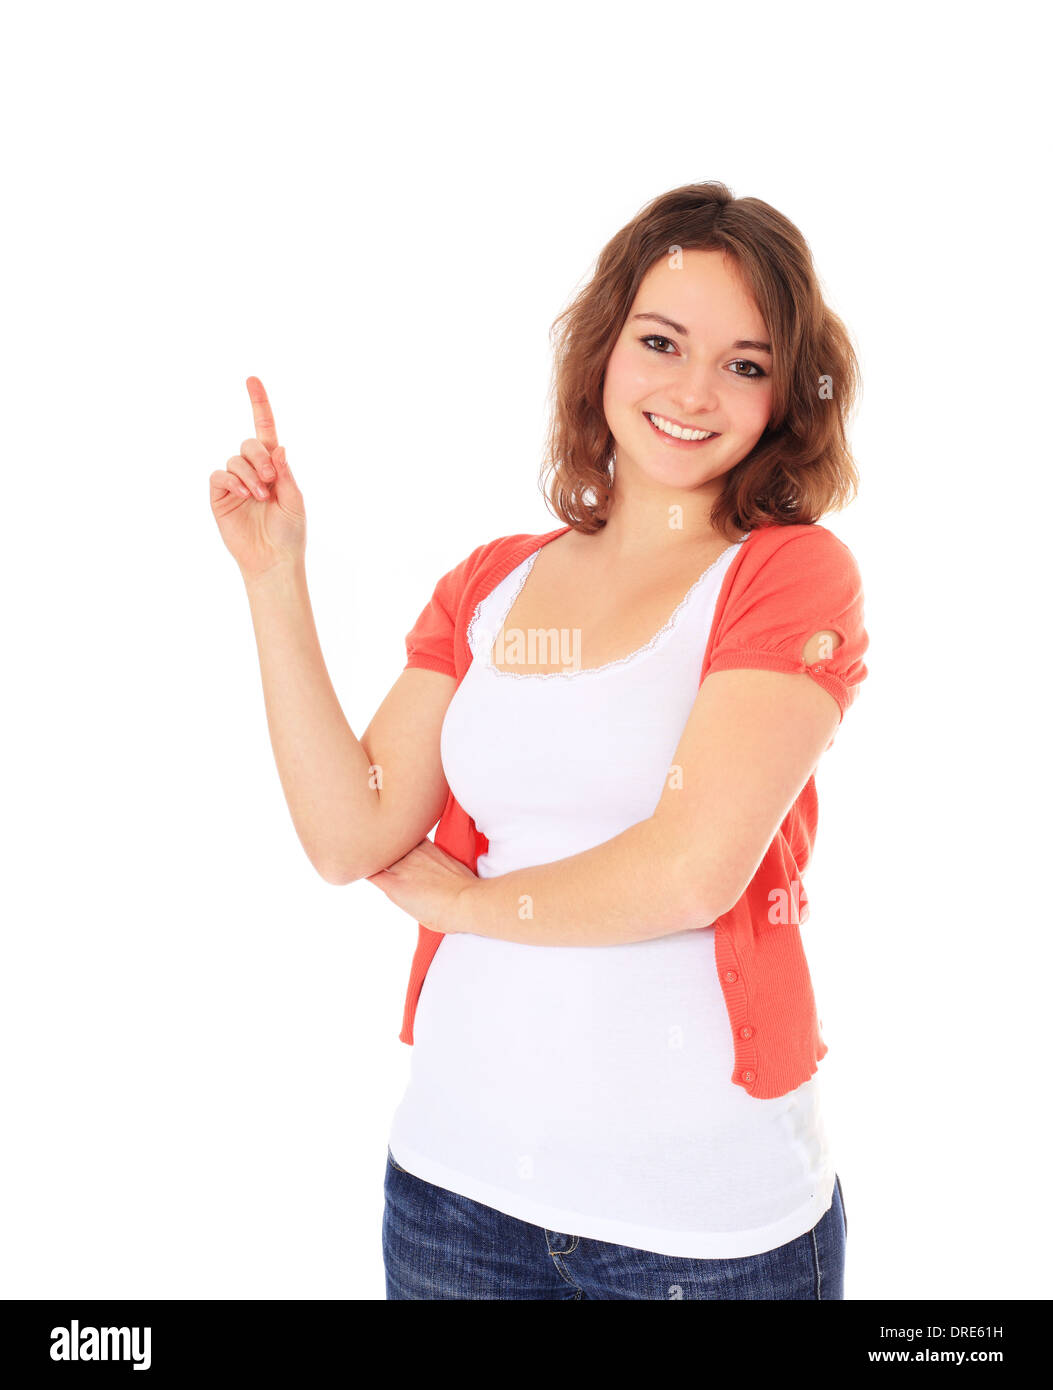 Attractive teenage girl making gesture. All on white background. Stock Photo